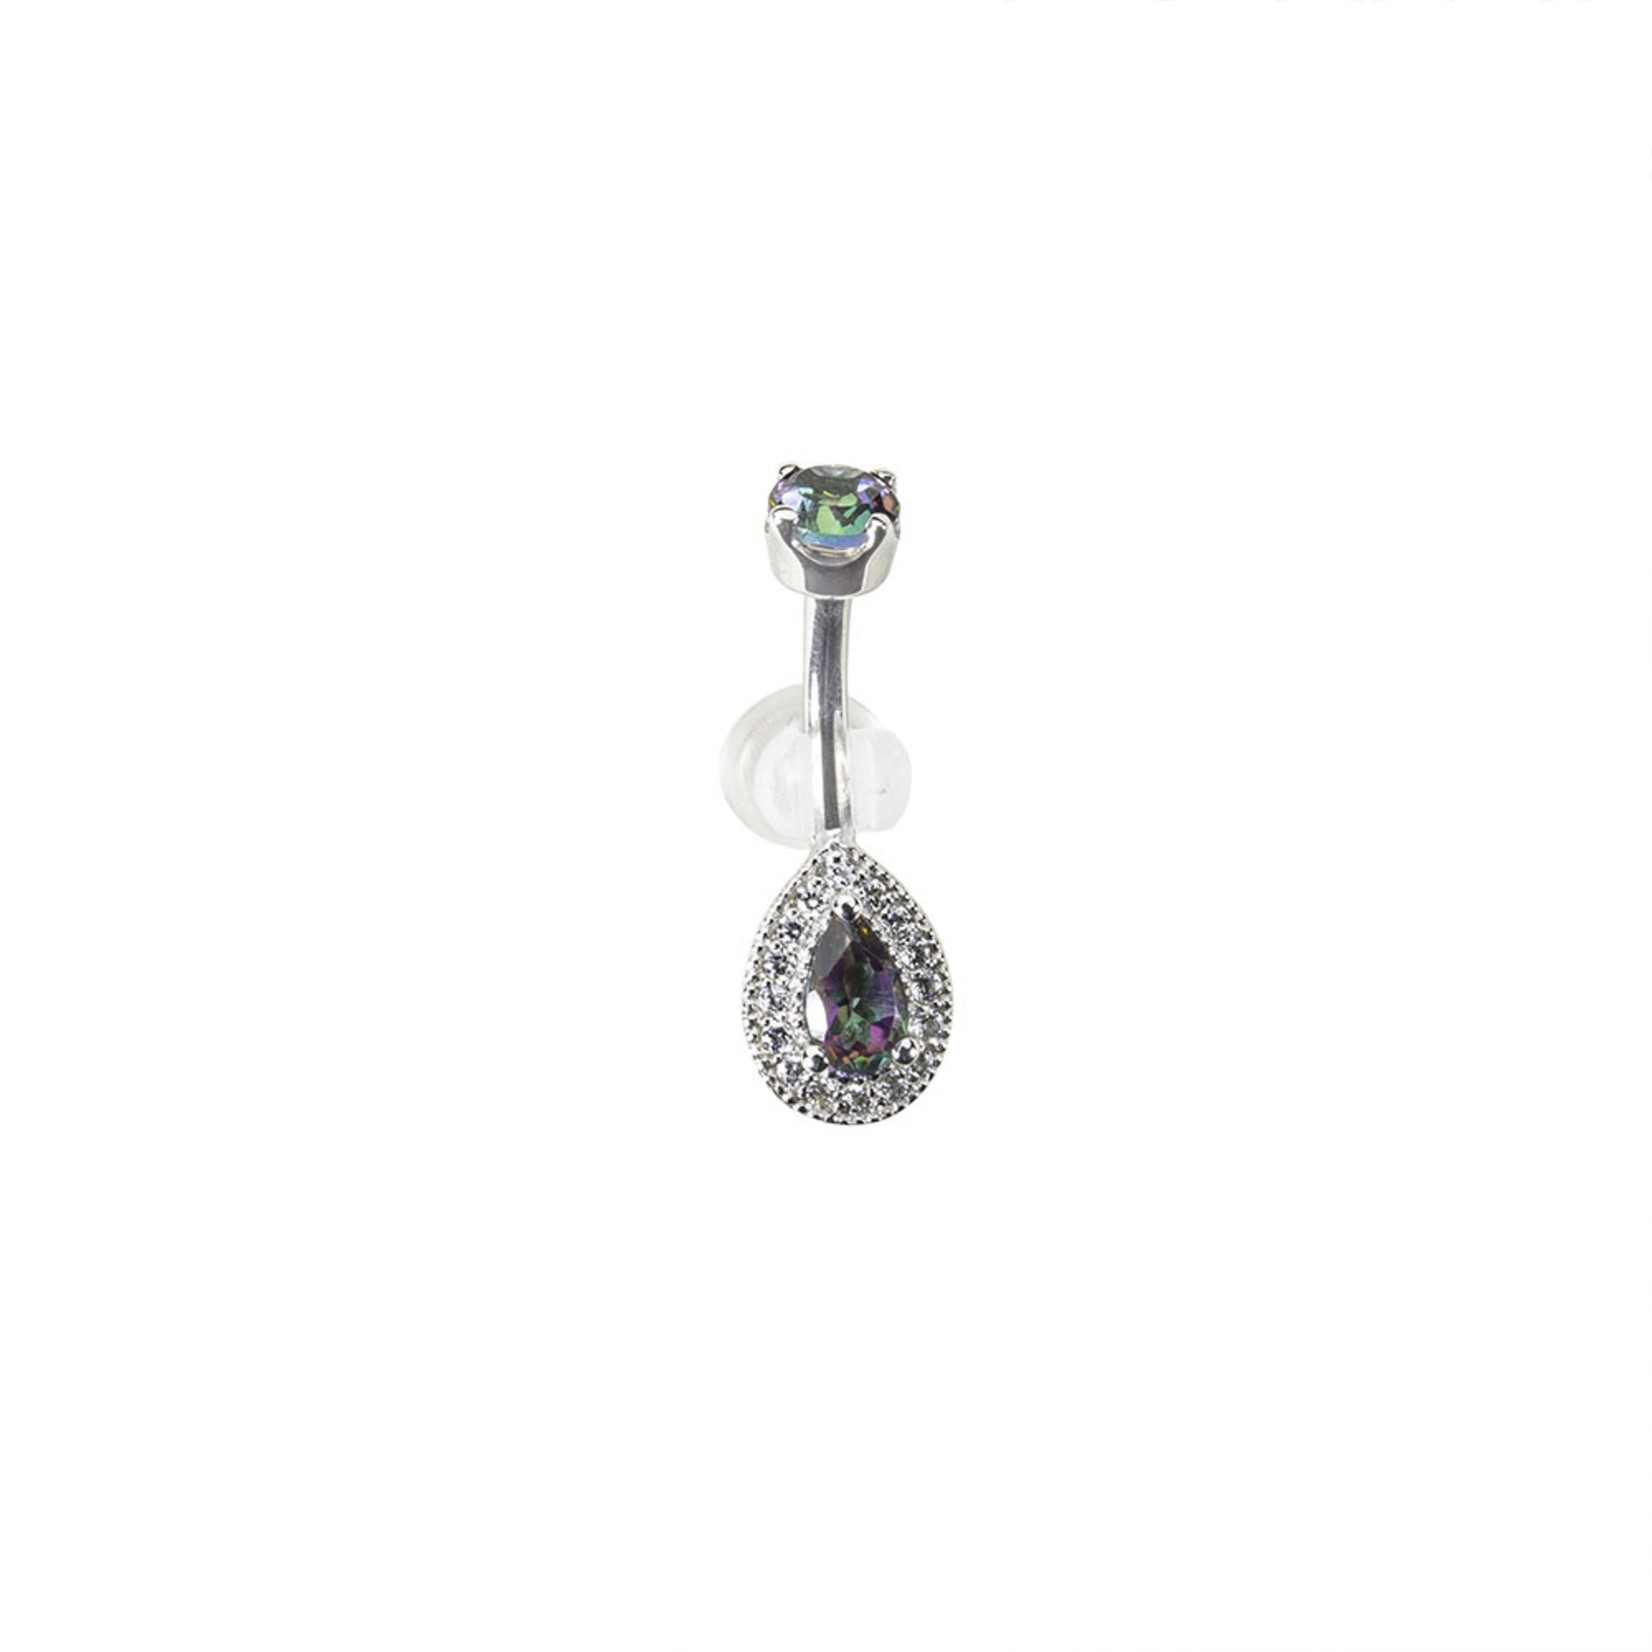 BVLA BVLA 14g 3/8 white gold "Pear Halo" navel curve with 4.0 prong set mystic topaz top and a 5x3 pear-cut Mystic Topaz surrounded by 1.0 CZ